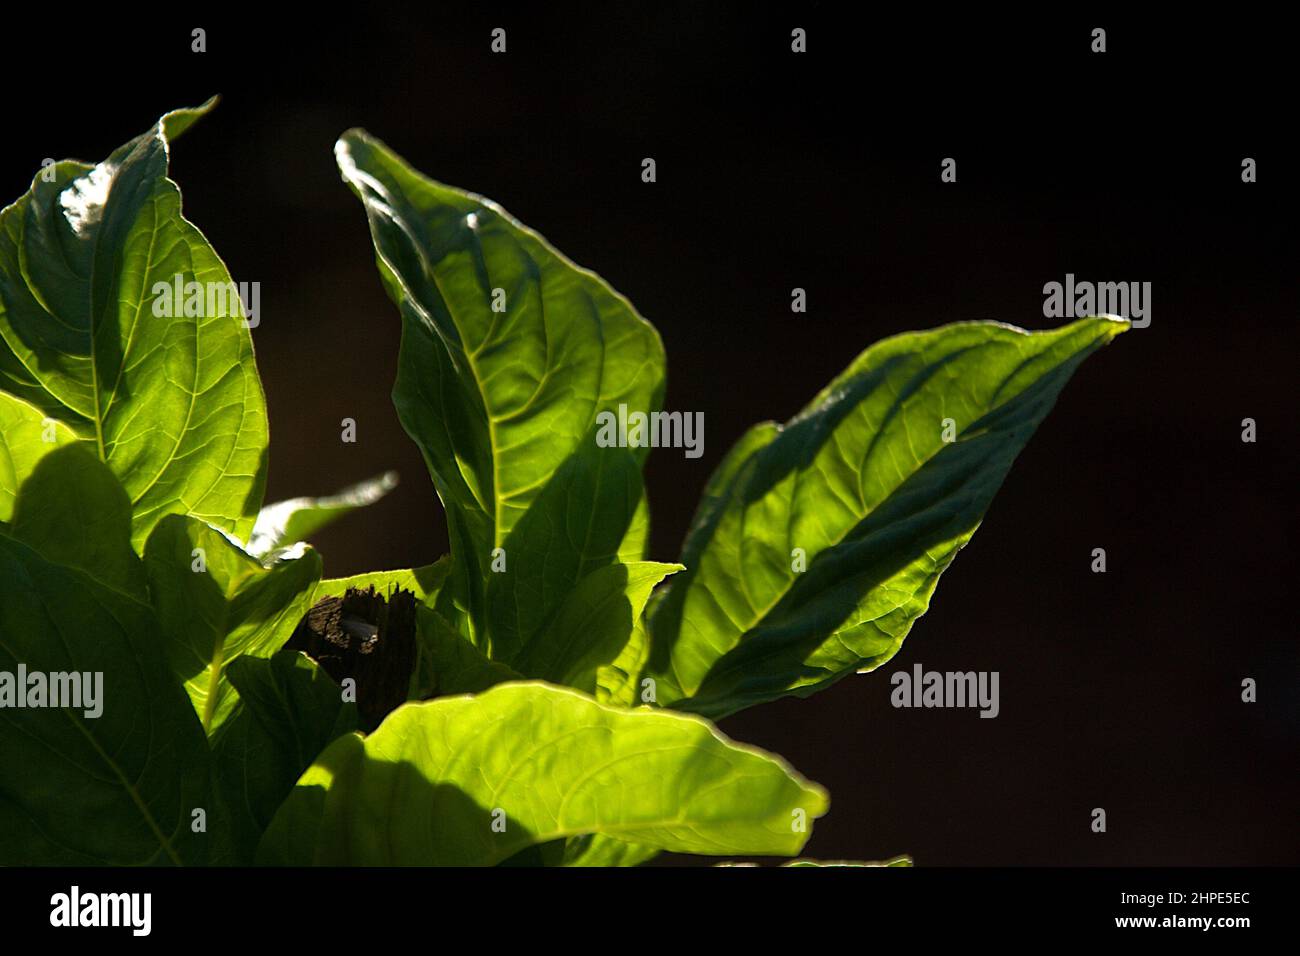 Play light and shadow on green leaves shot against light on dark black background Stock Photo